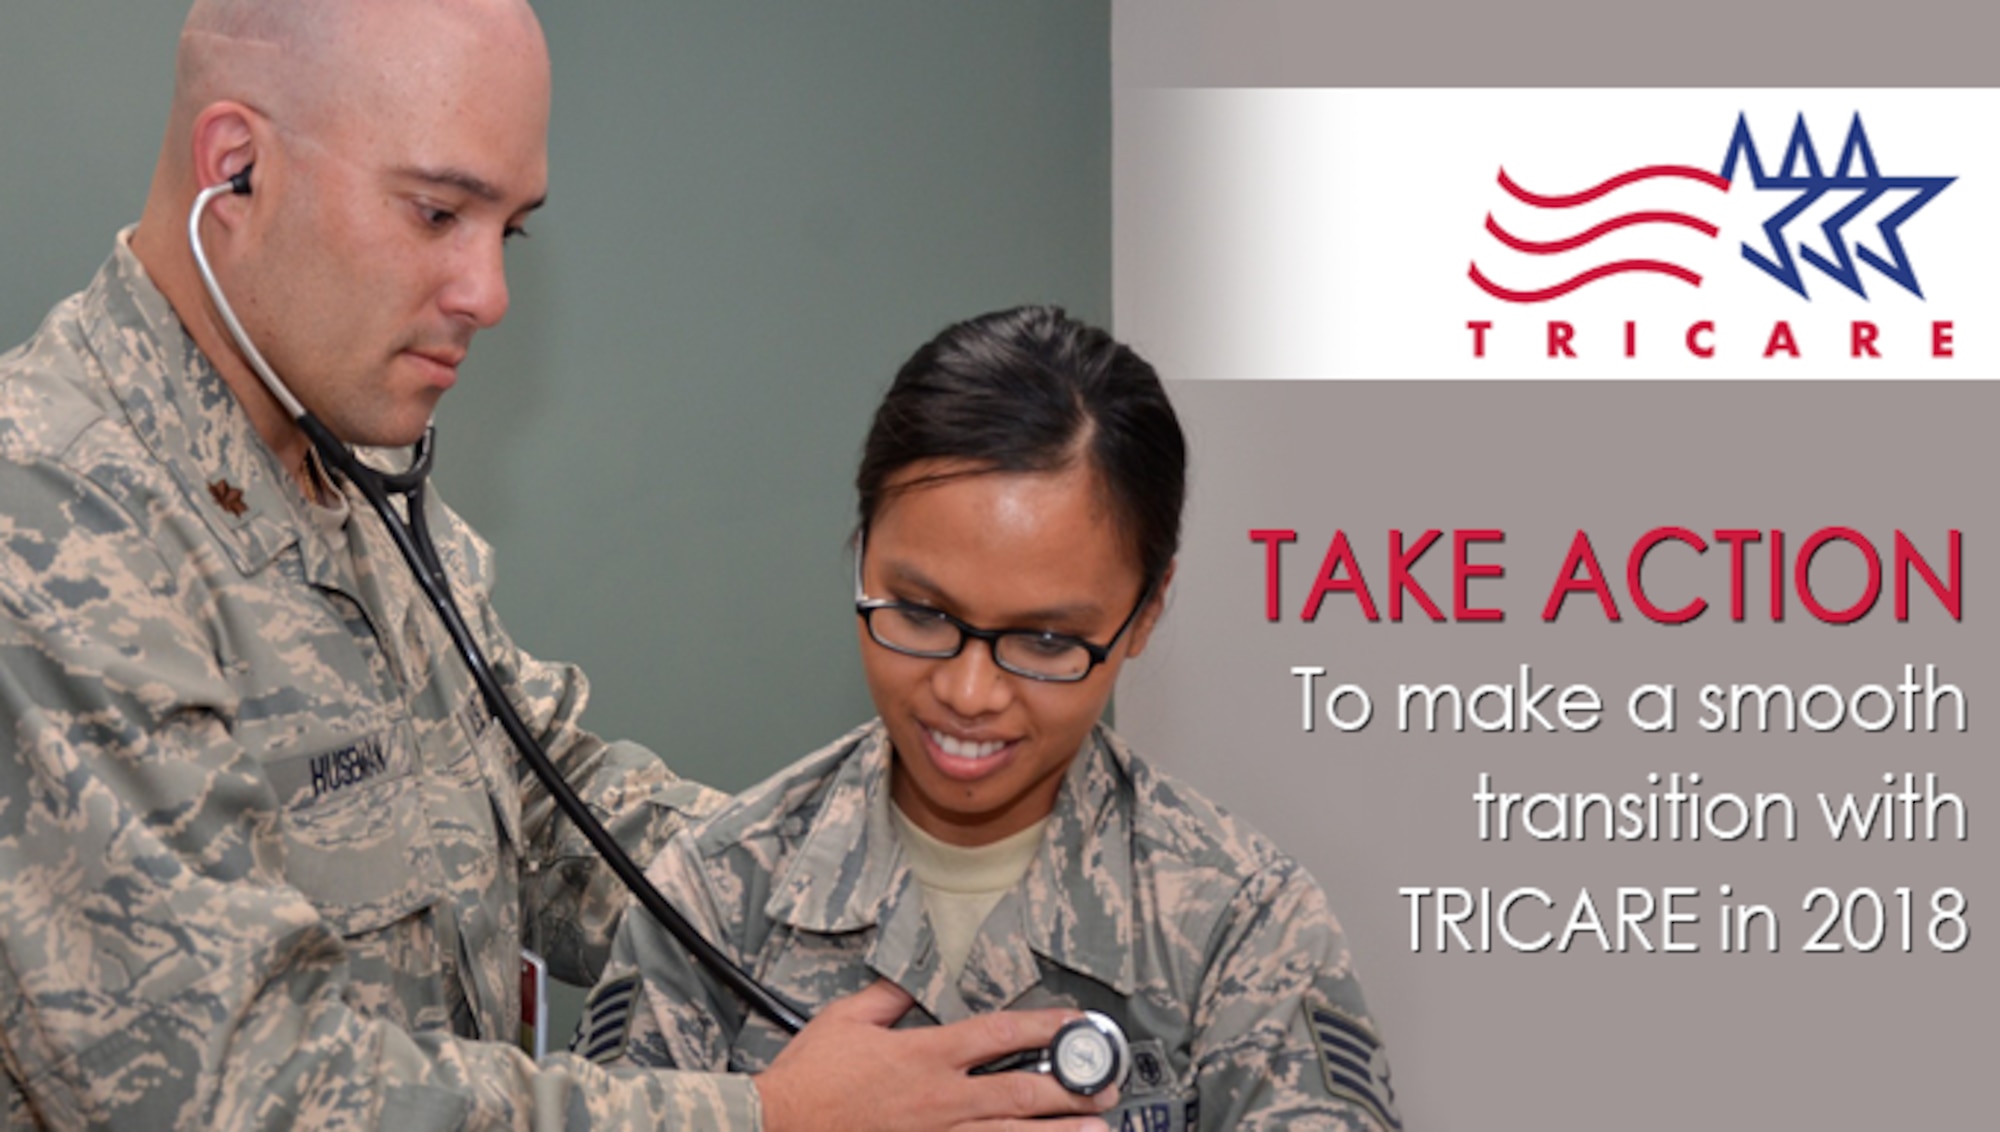 Take action to make a smooth transition with TRICARE in 2018